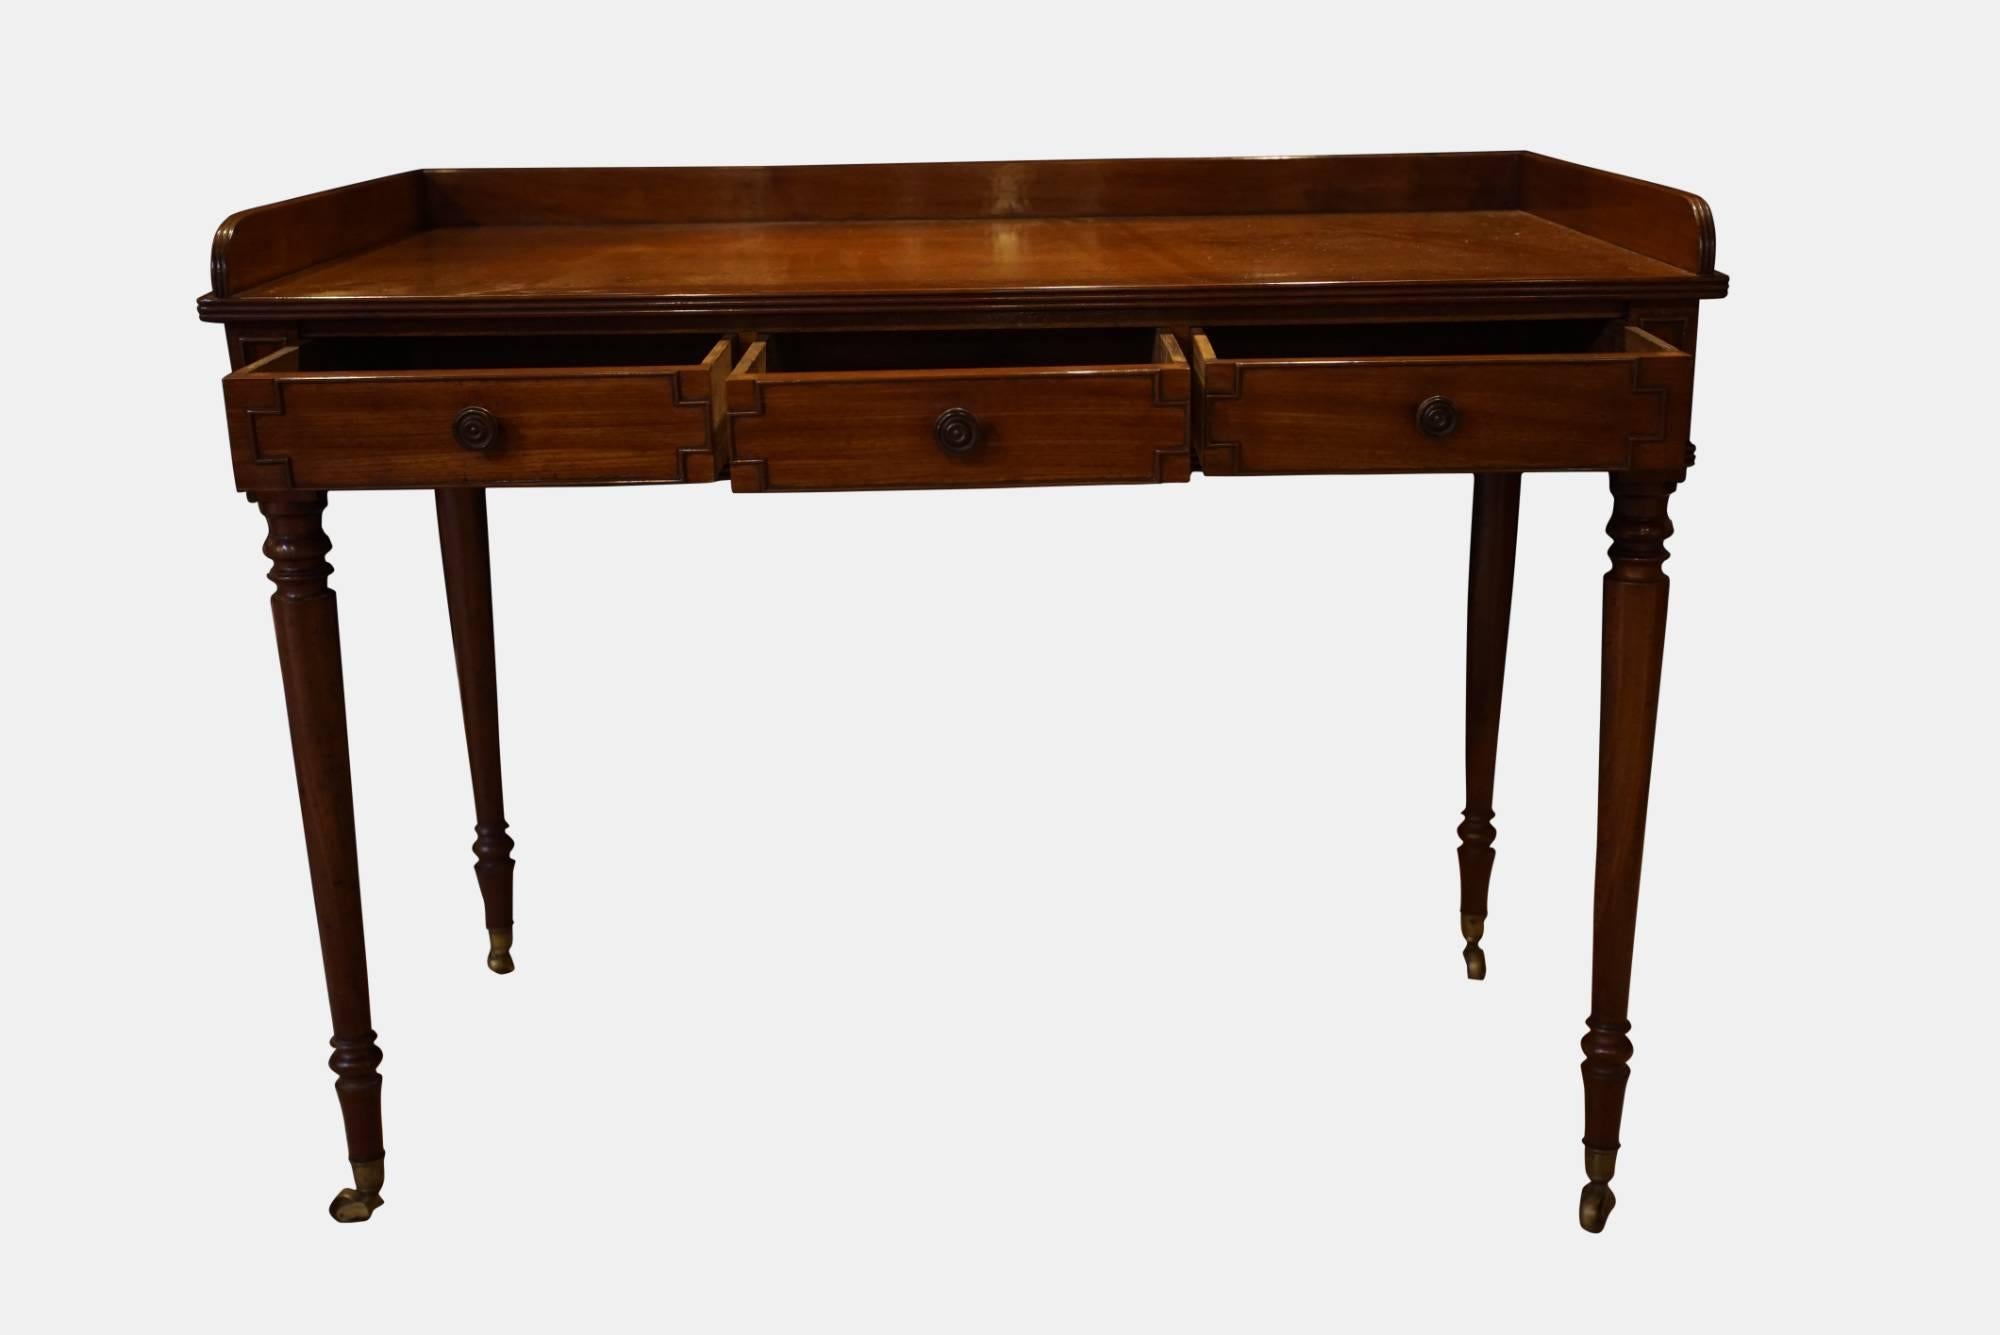 A 3-drawer mahogany side table by Gillow Standing on finely turned legs and ebony knobs,

circa 1820.